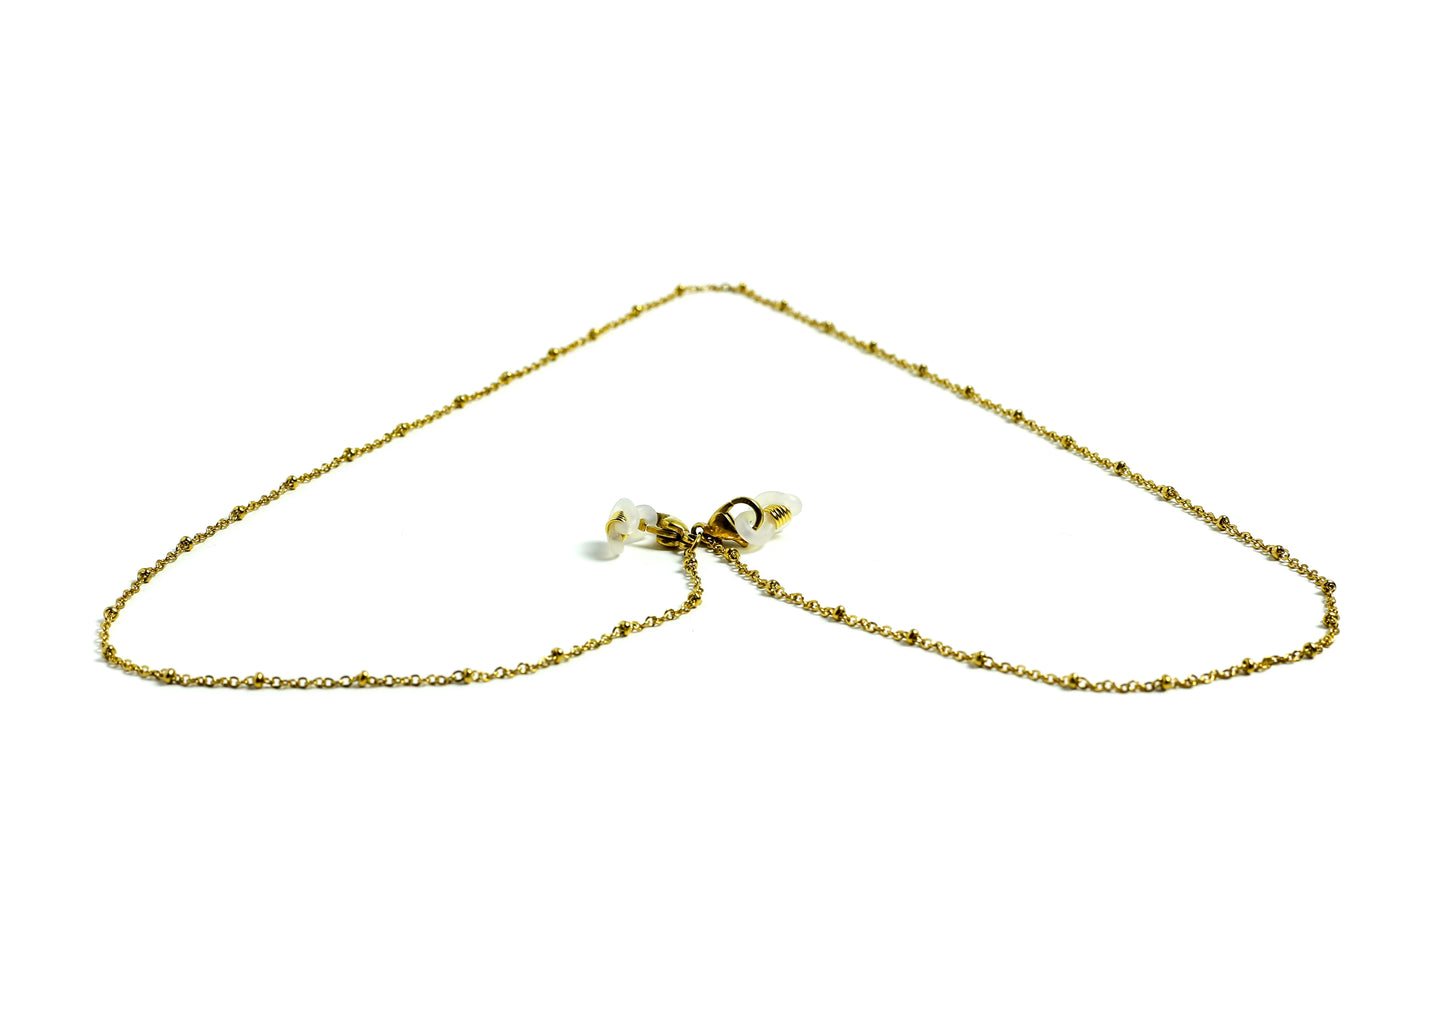 Women's Gold Plated Sunglass and Mask Chain handmade Necklace at RM KANDY